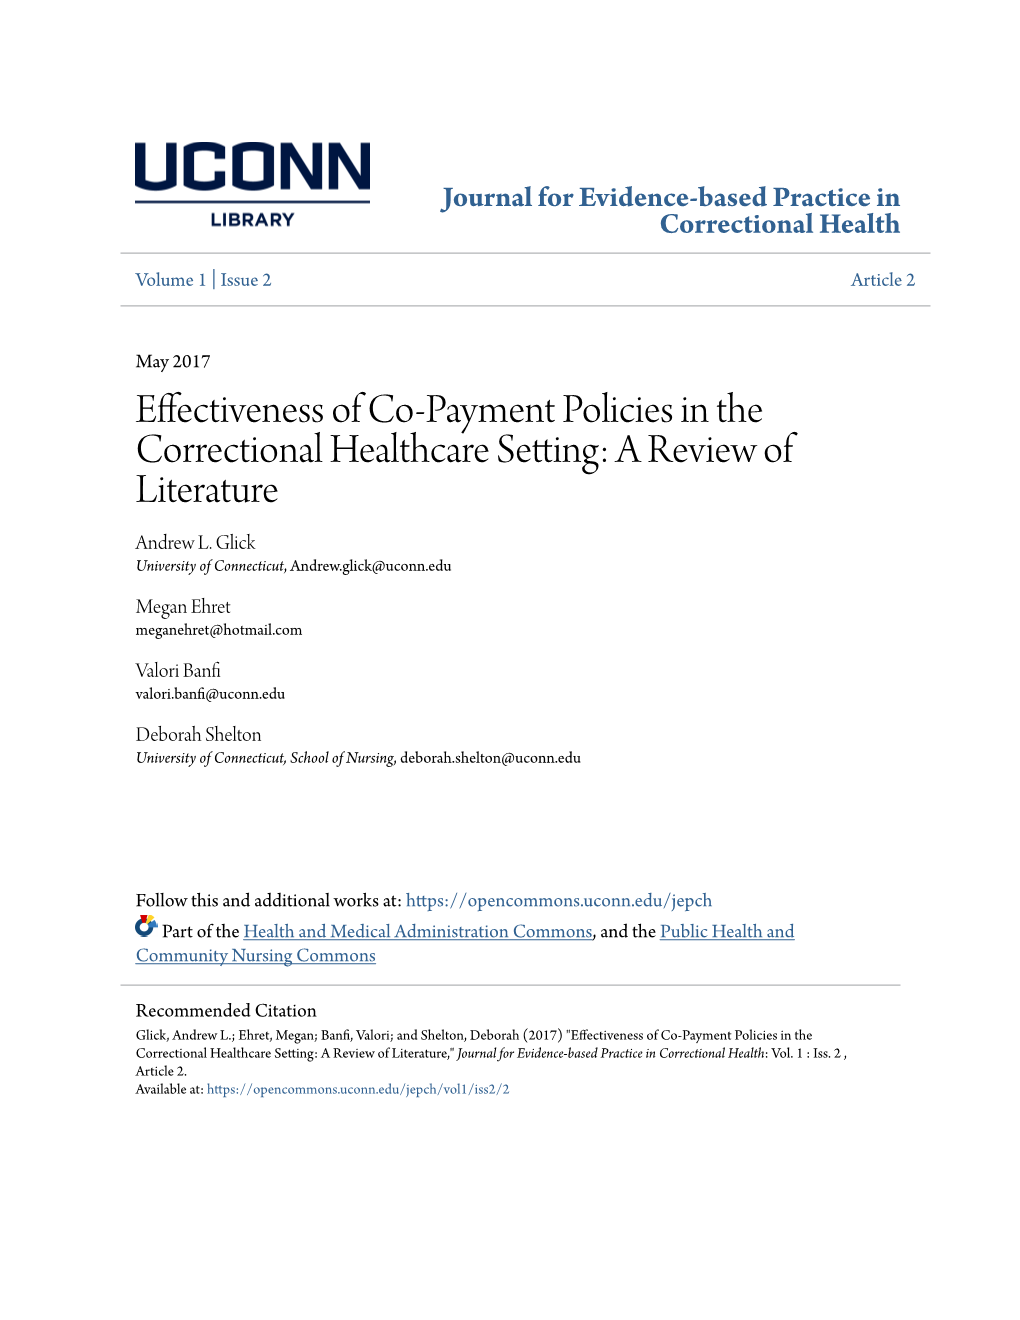 Effectiveness of Co-Payment Policies in the Correctional Healthcare Setting: a Review of Literature Andrew L